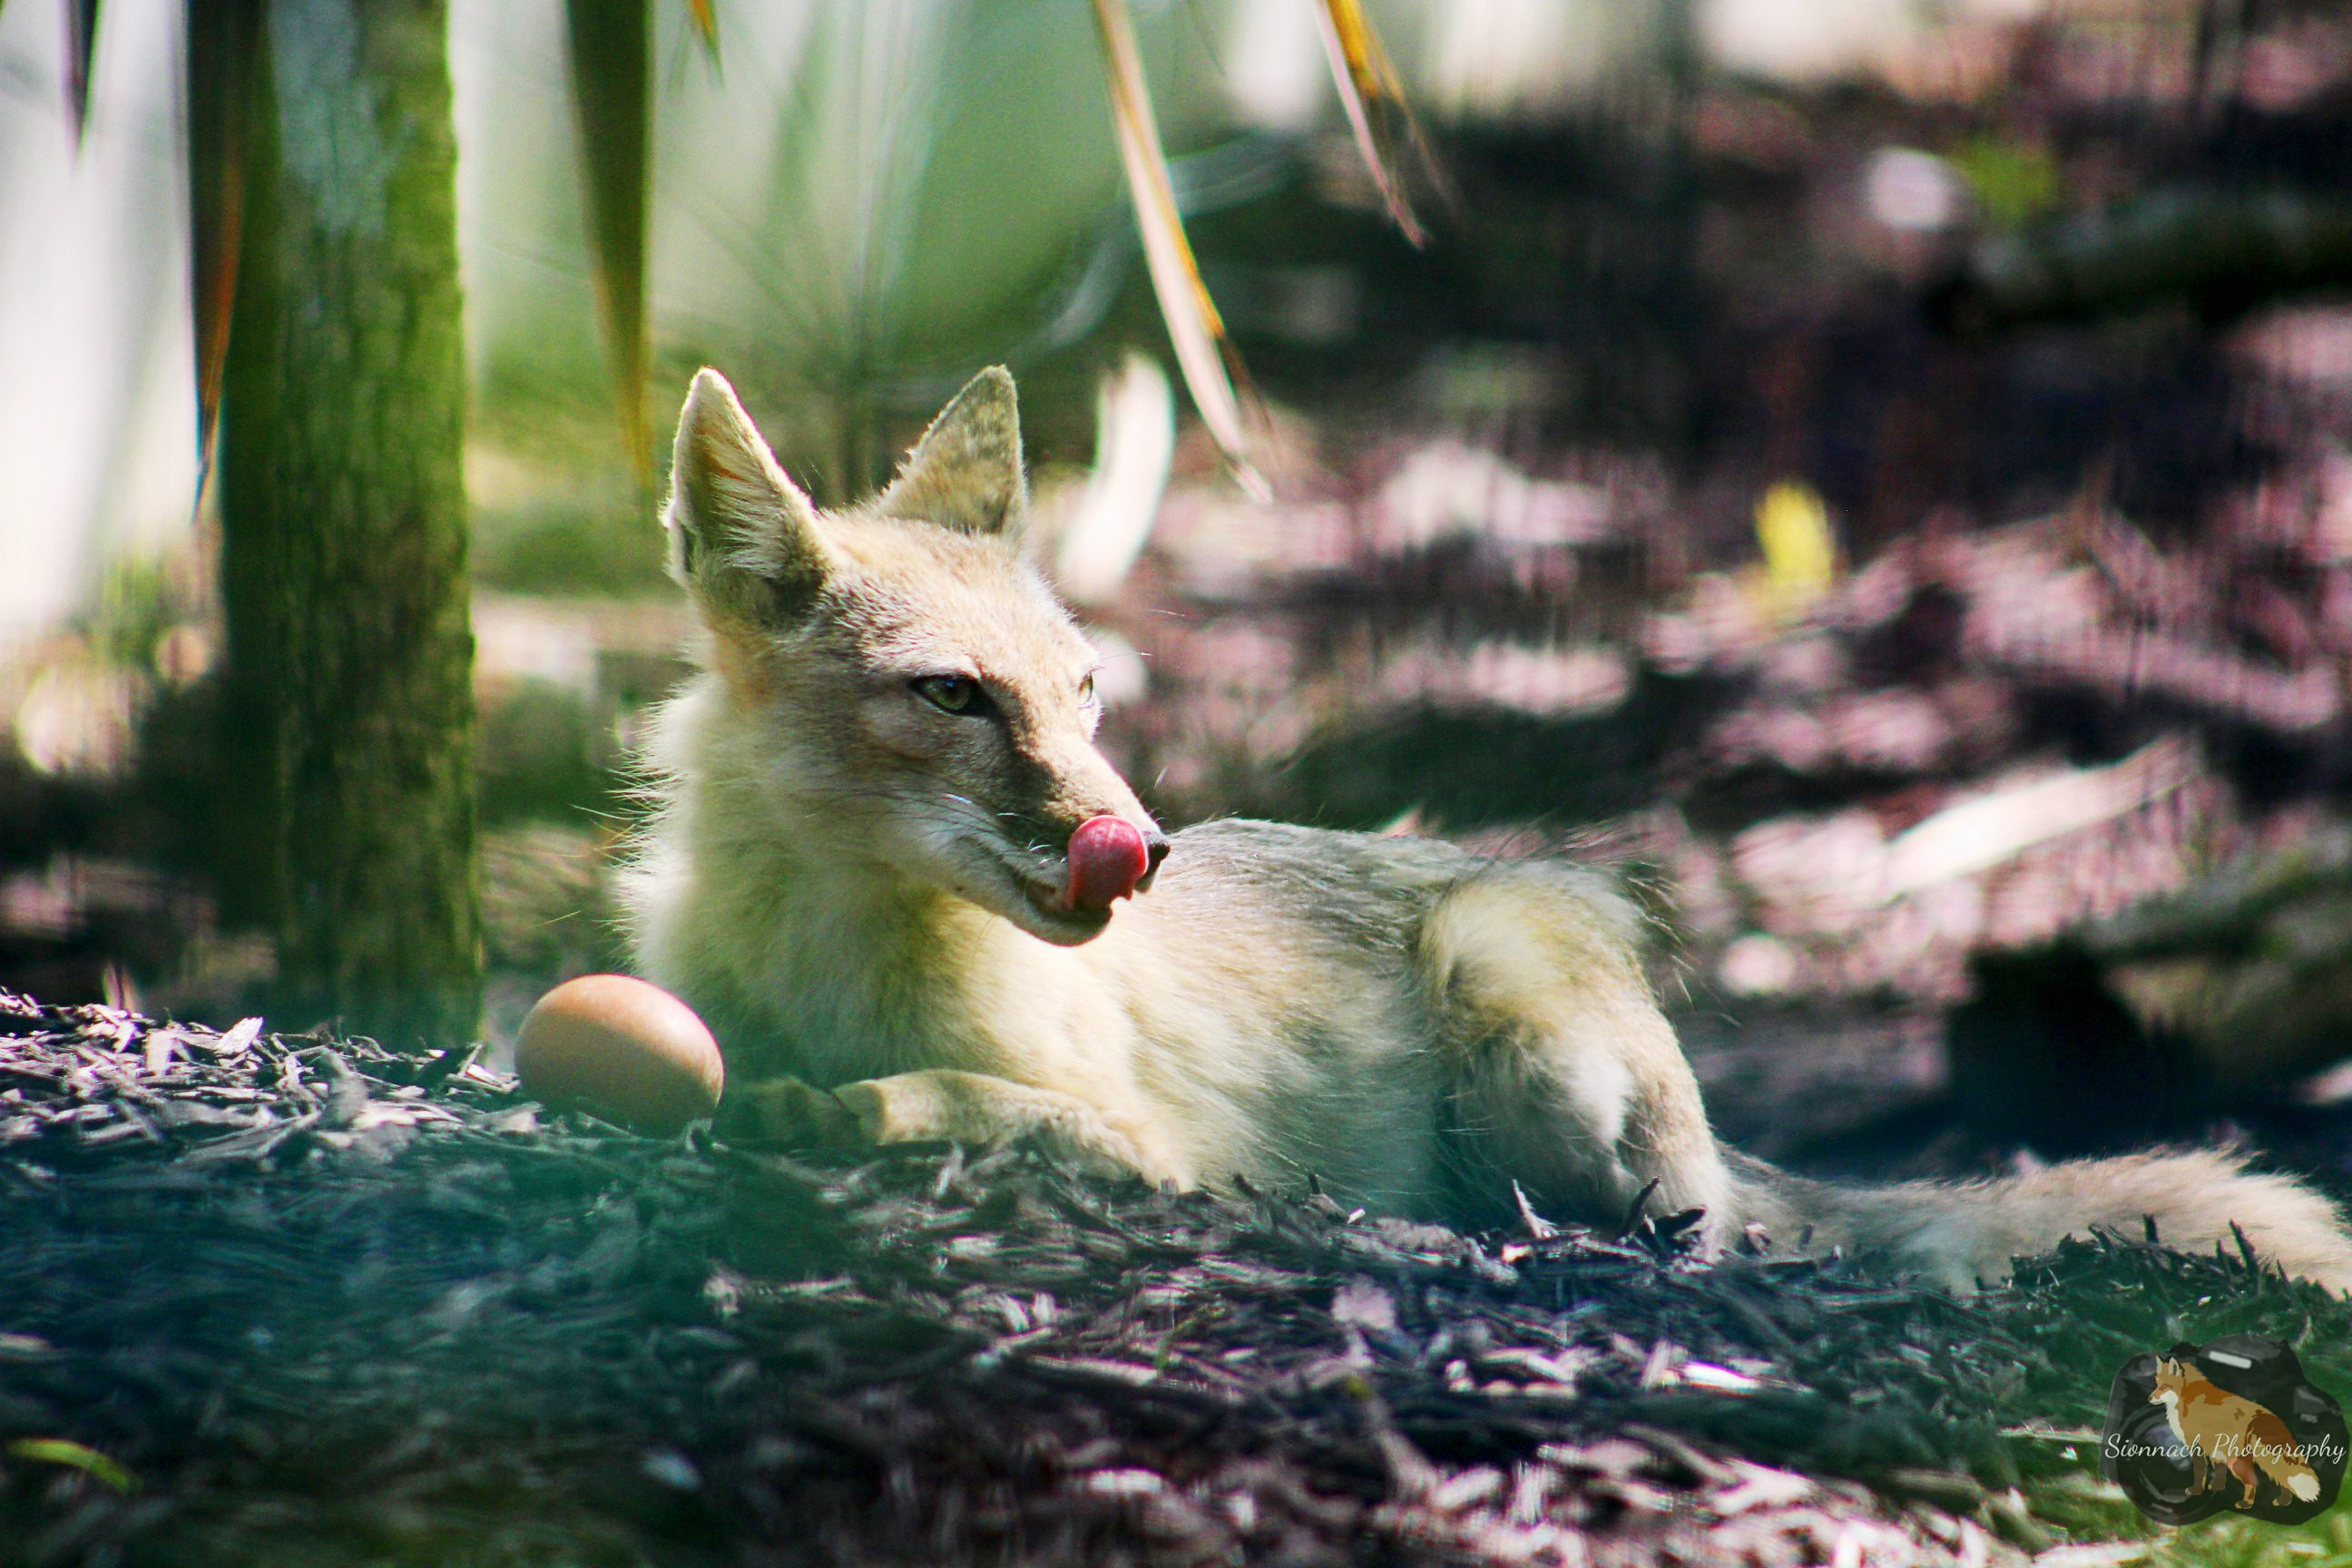 A Corsac fox licking their lips while sitting in a wooden